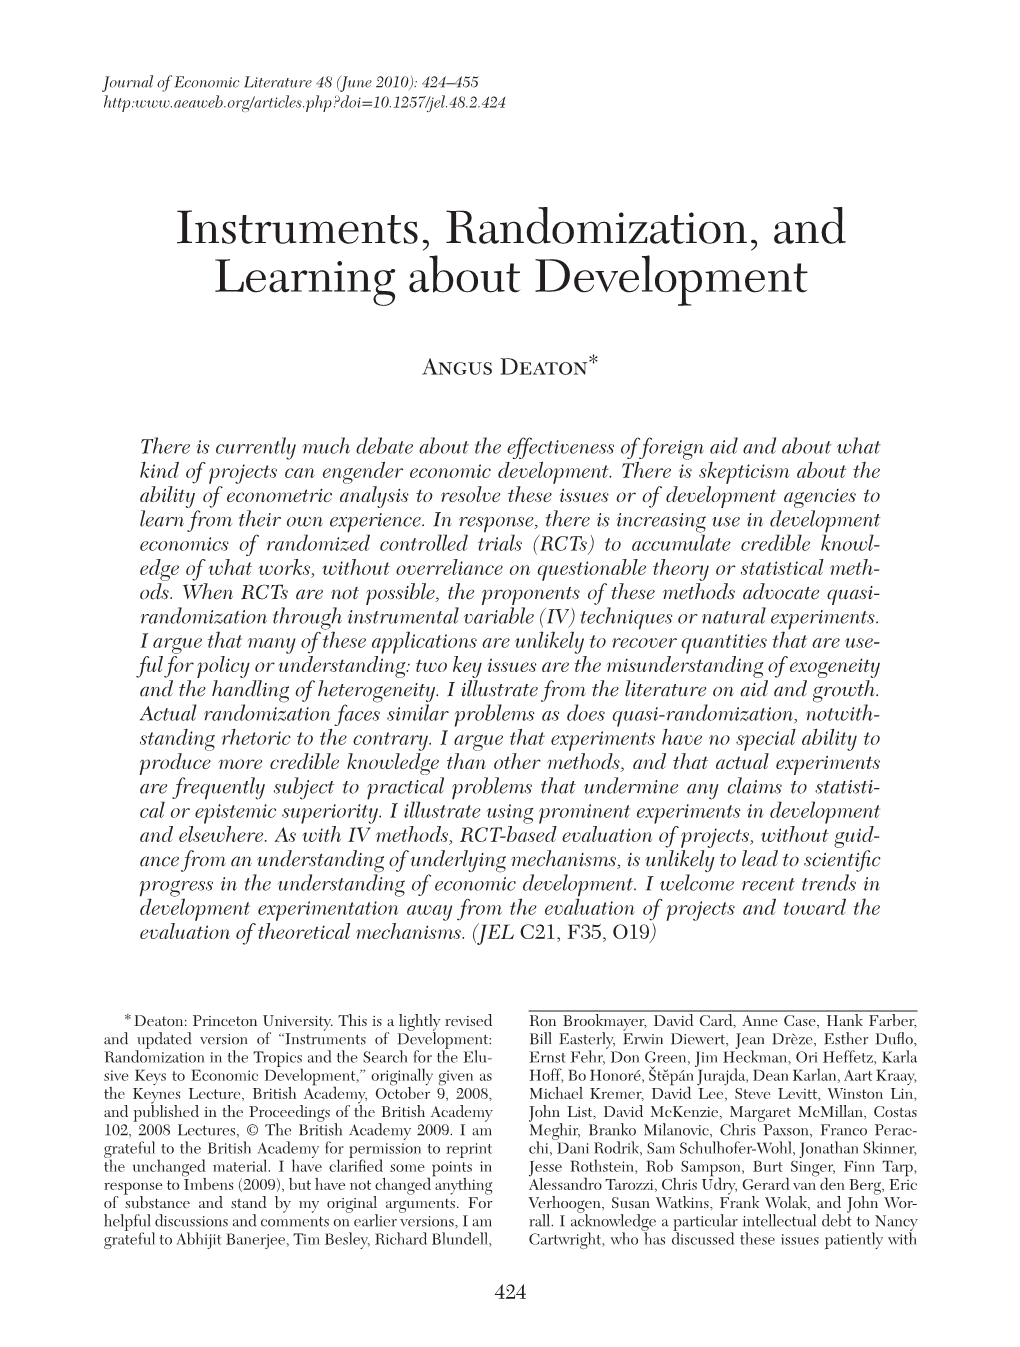 Instruments, Randomization, and Learning About Development